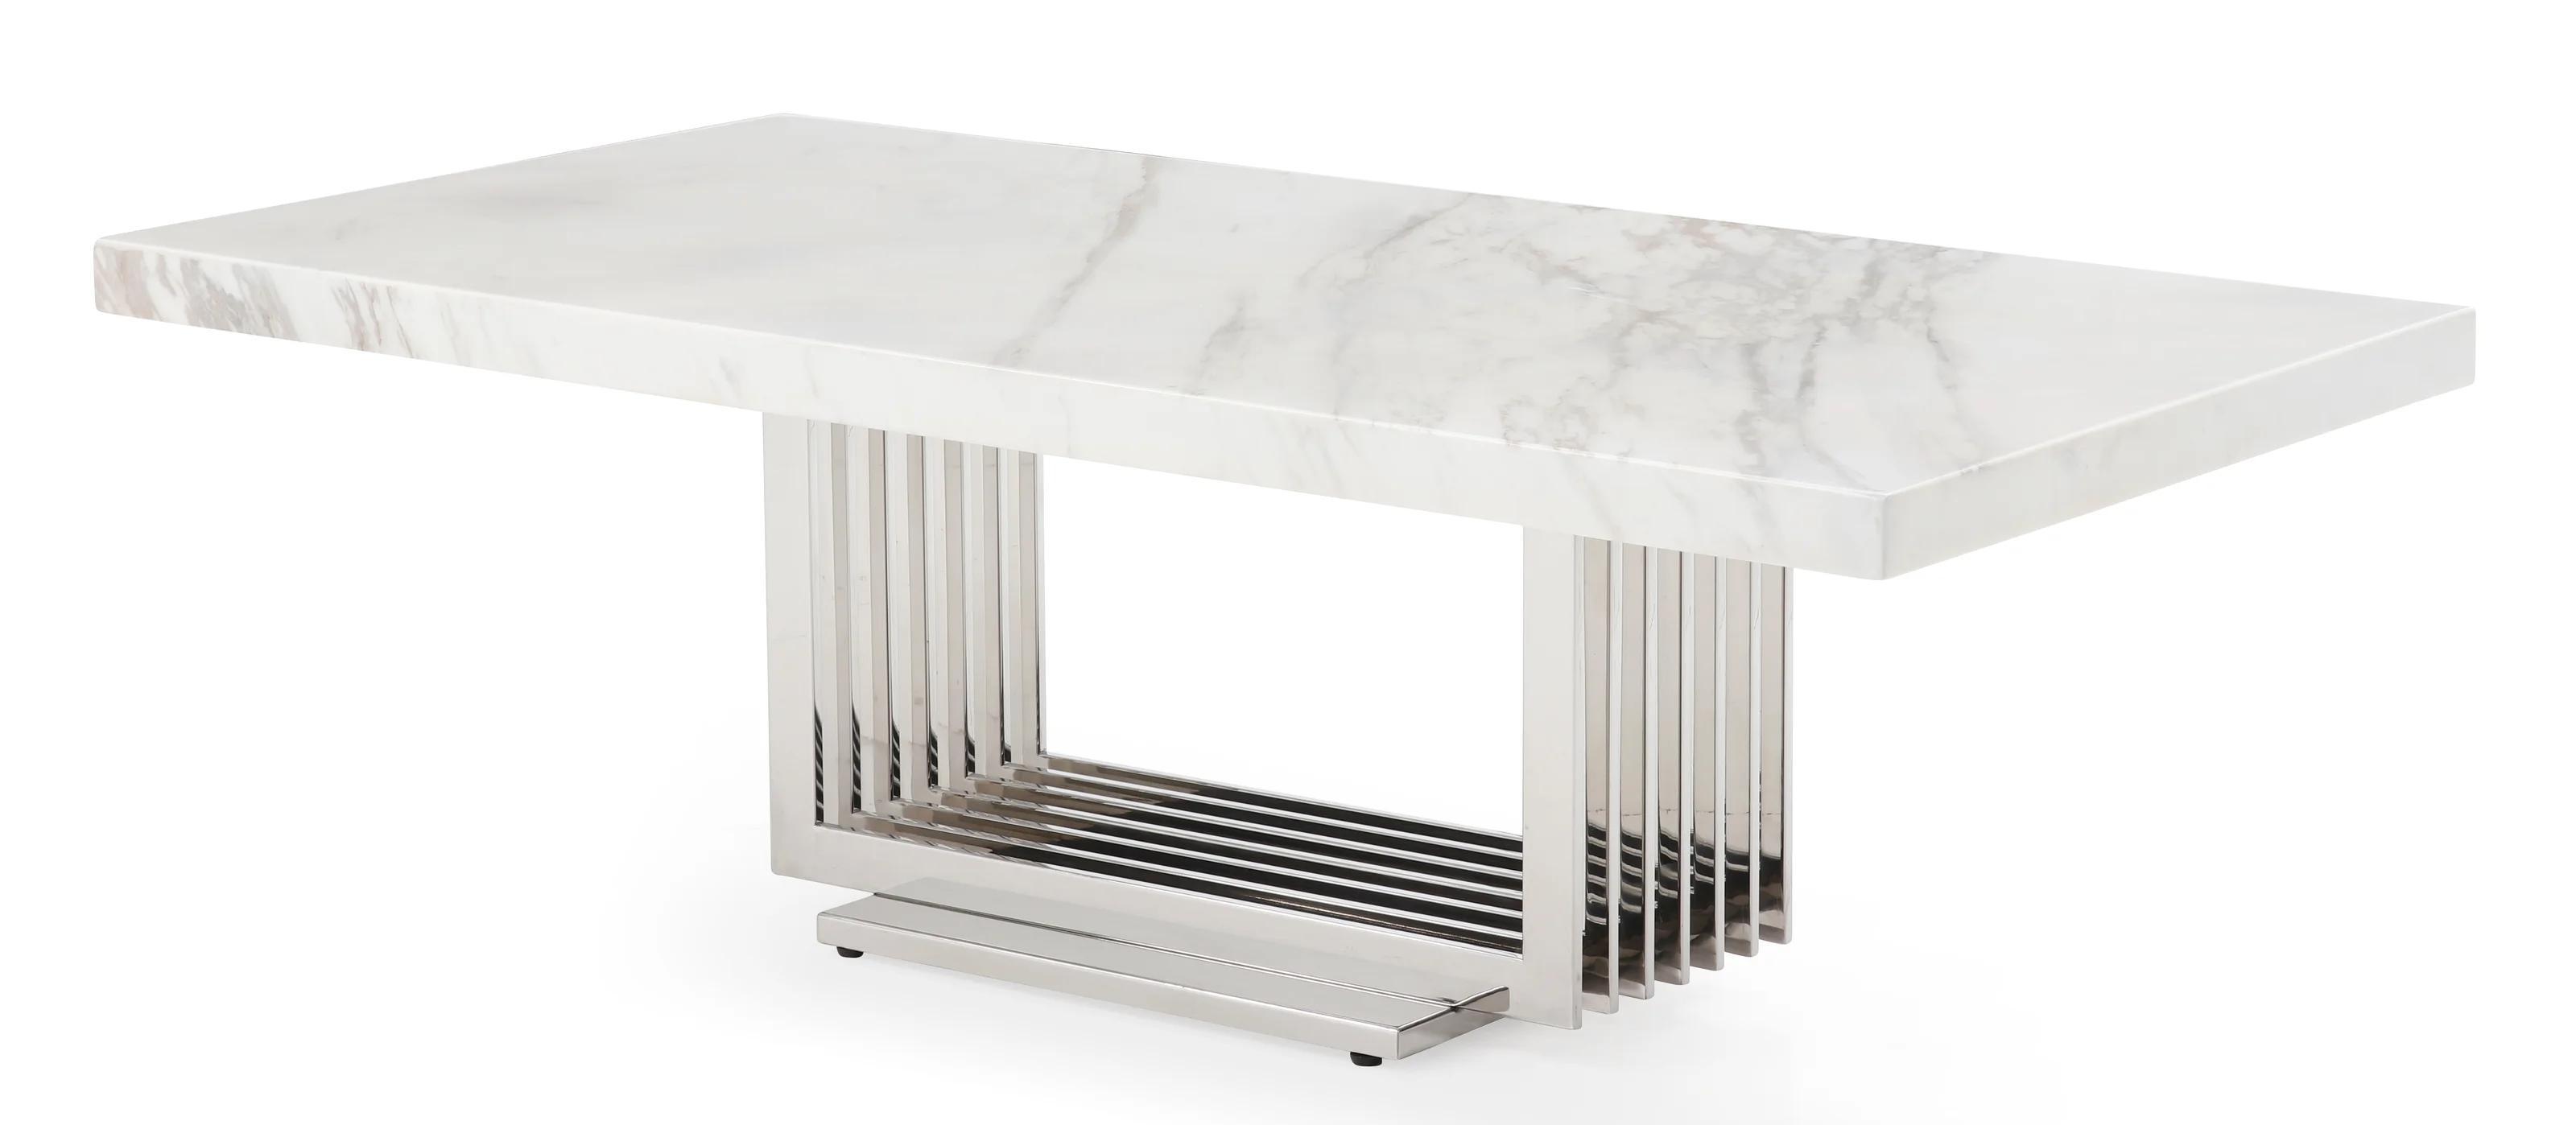 Contemporary, Modern Coffee Table Kingsley VGVCCT8933-STL in White, Silver 